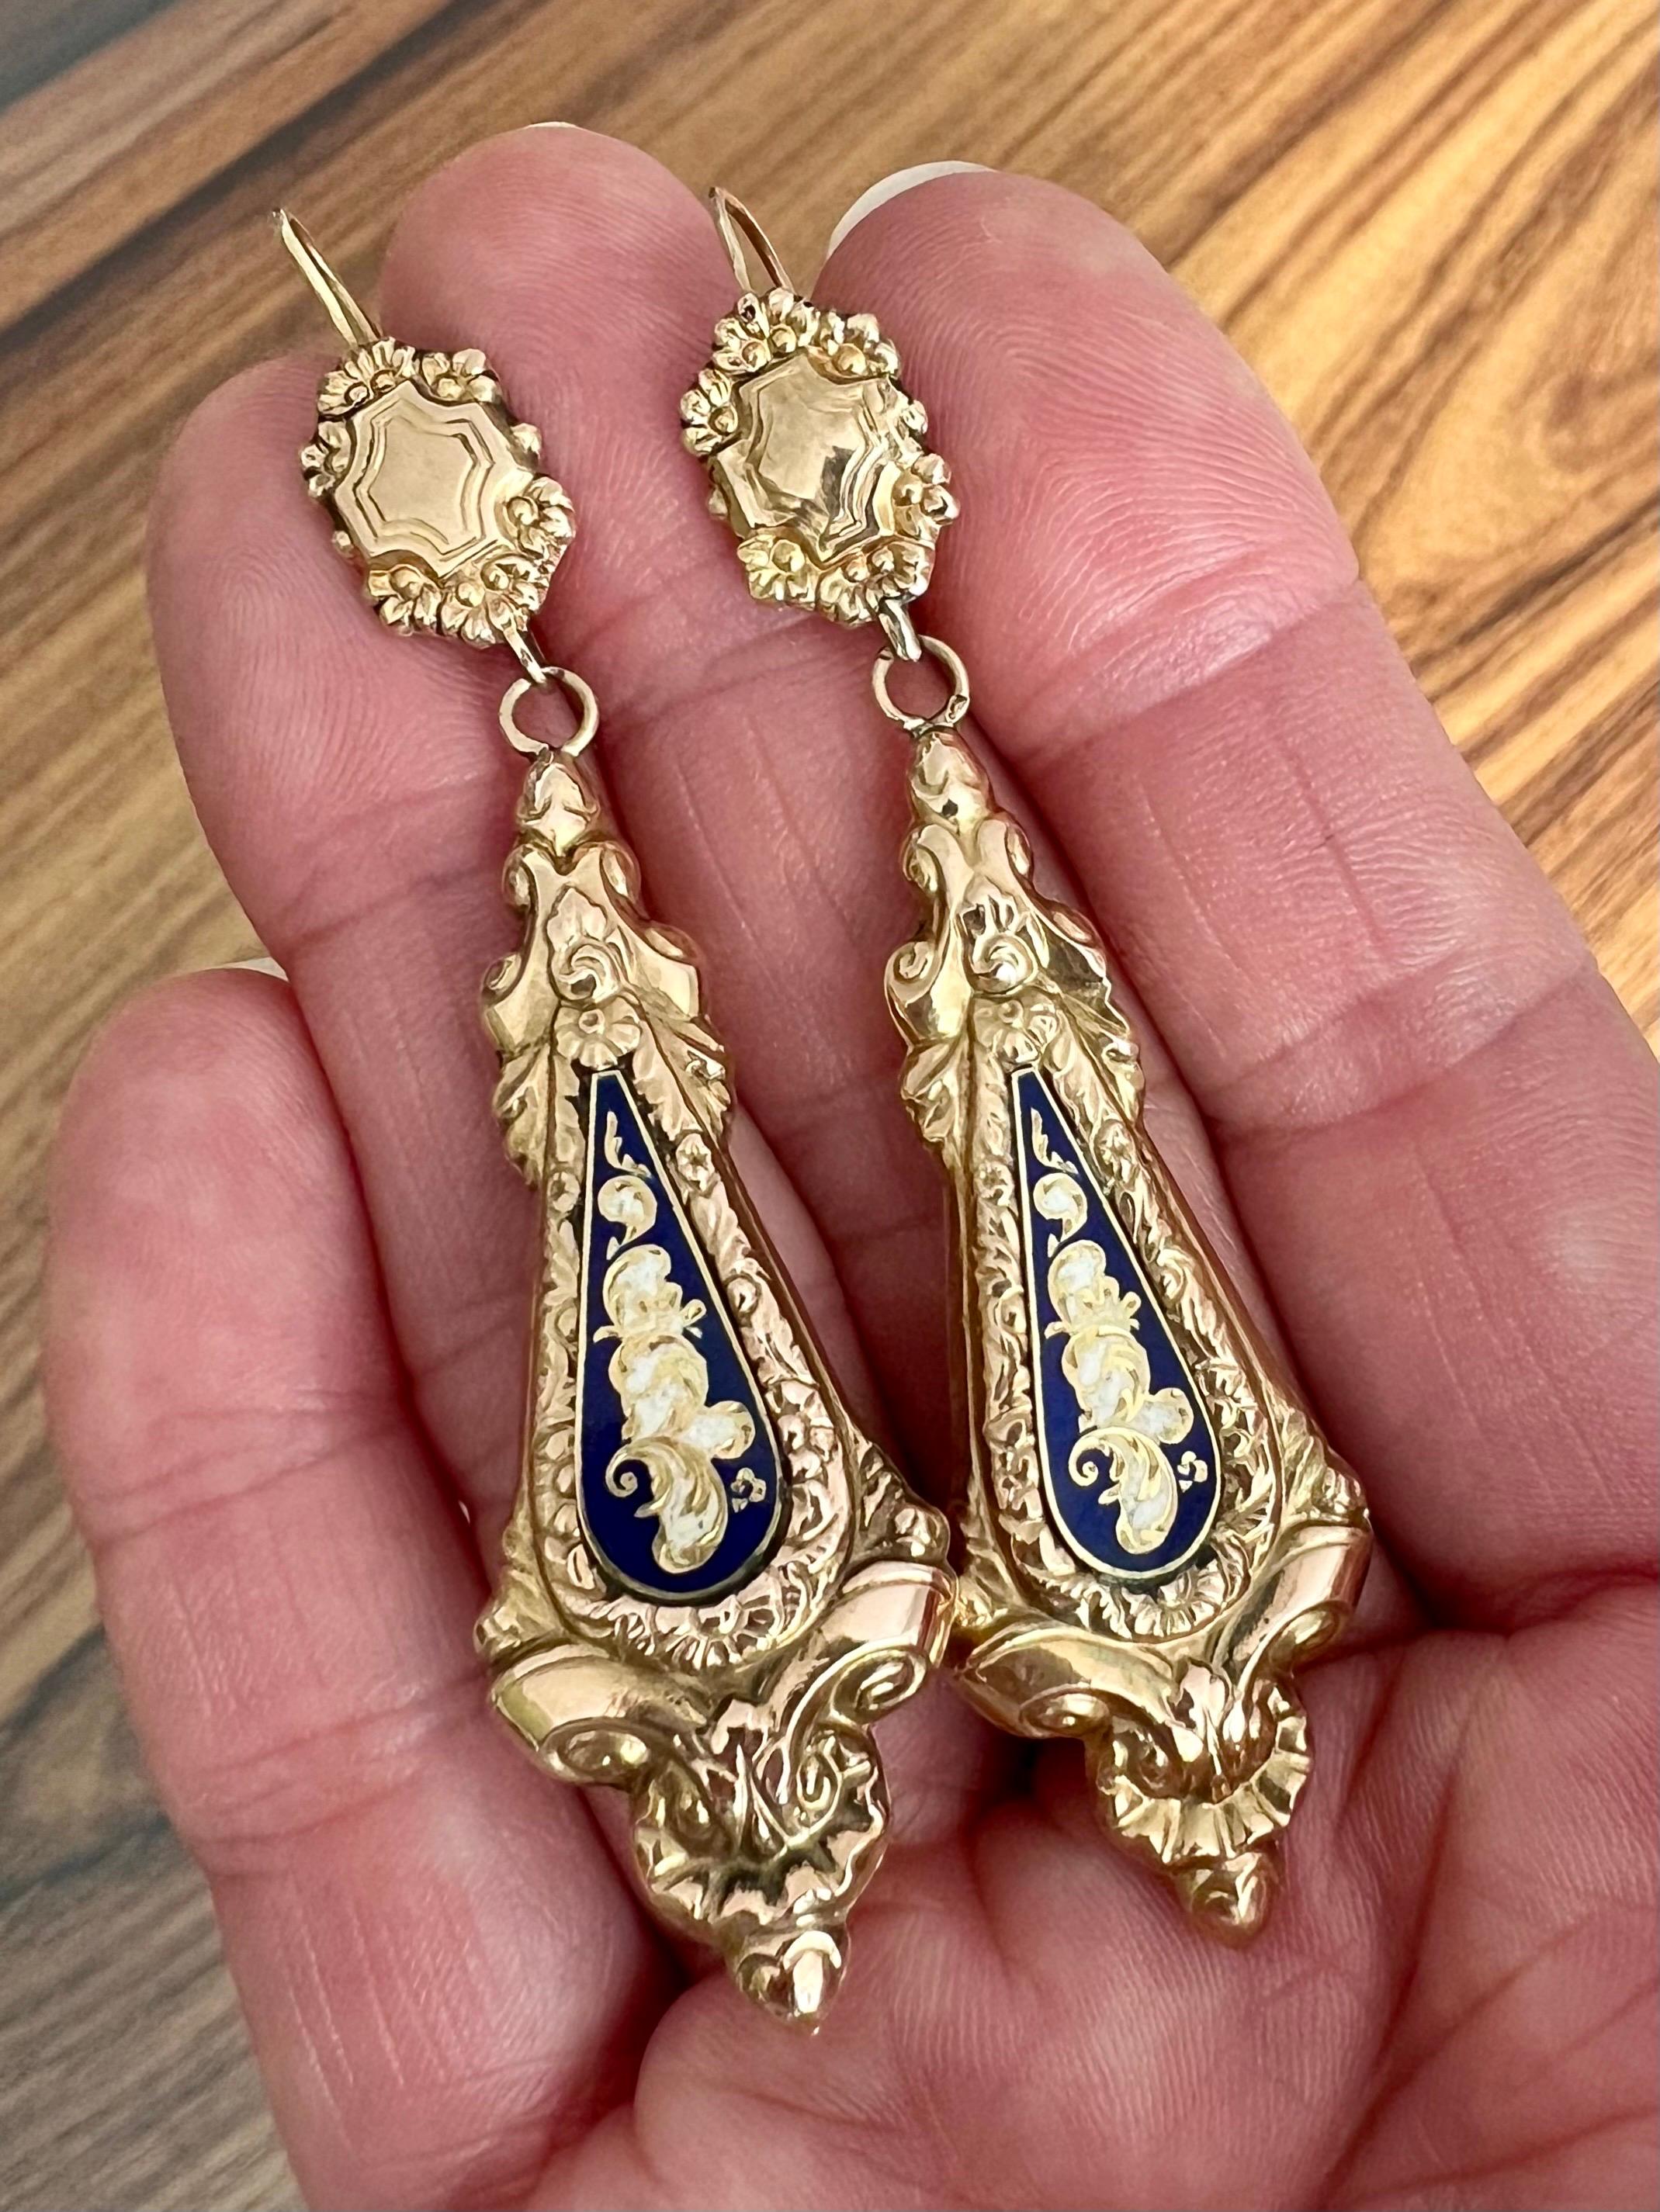 These antique Georgian 14 karat gold repoussé enameled blue and white dangle earrings are from around 1830. They are very rare. Popular motifs in this artisan era includes, flowers, crescents, ribbons, bows, leaves, feather plumes, and sprays of